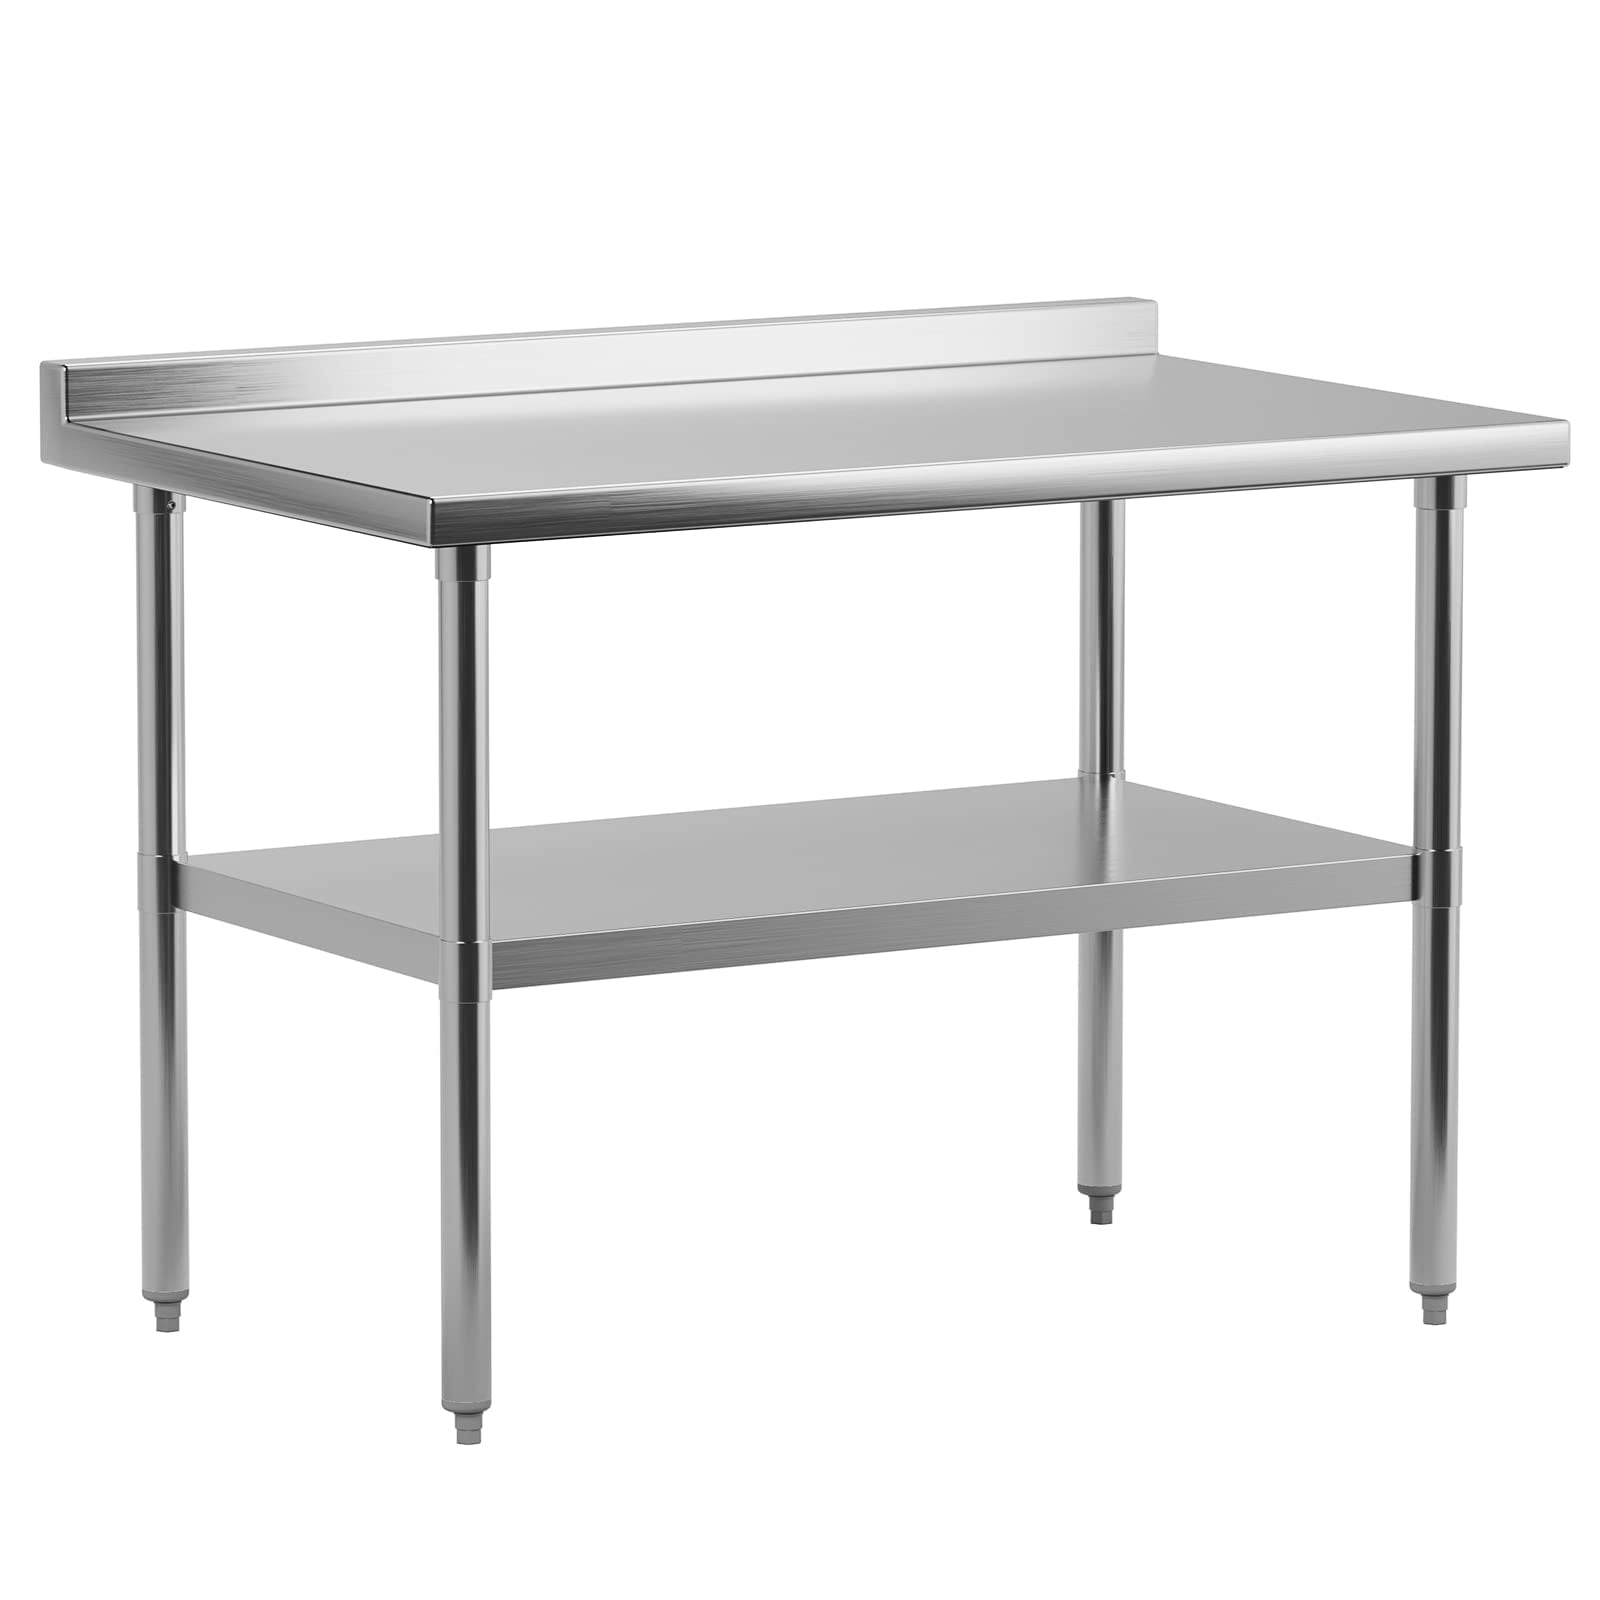 Stainless Steel Table for Prep & Work, Heavy Duty Commercial Kitchen ...